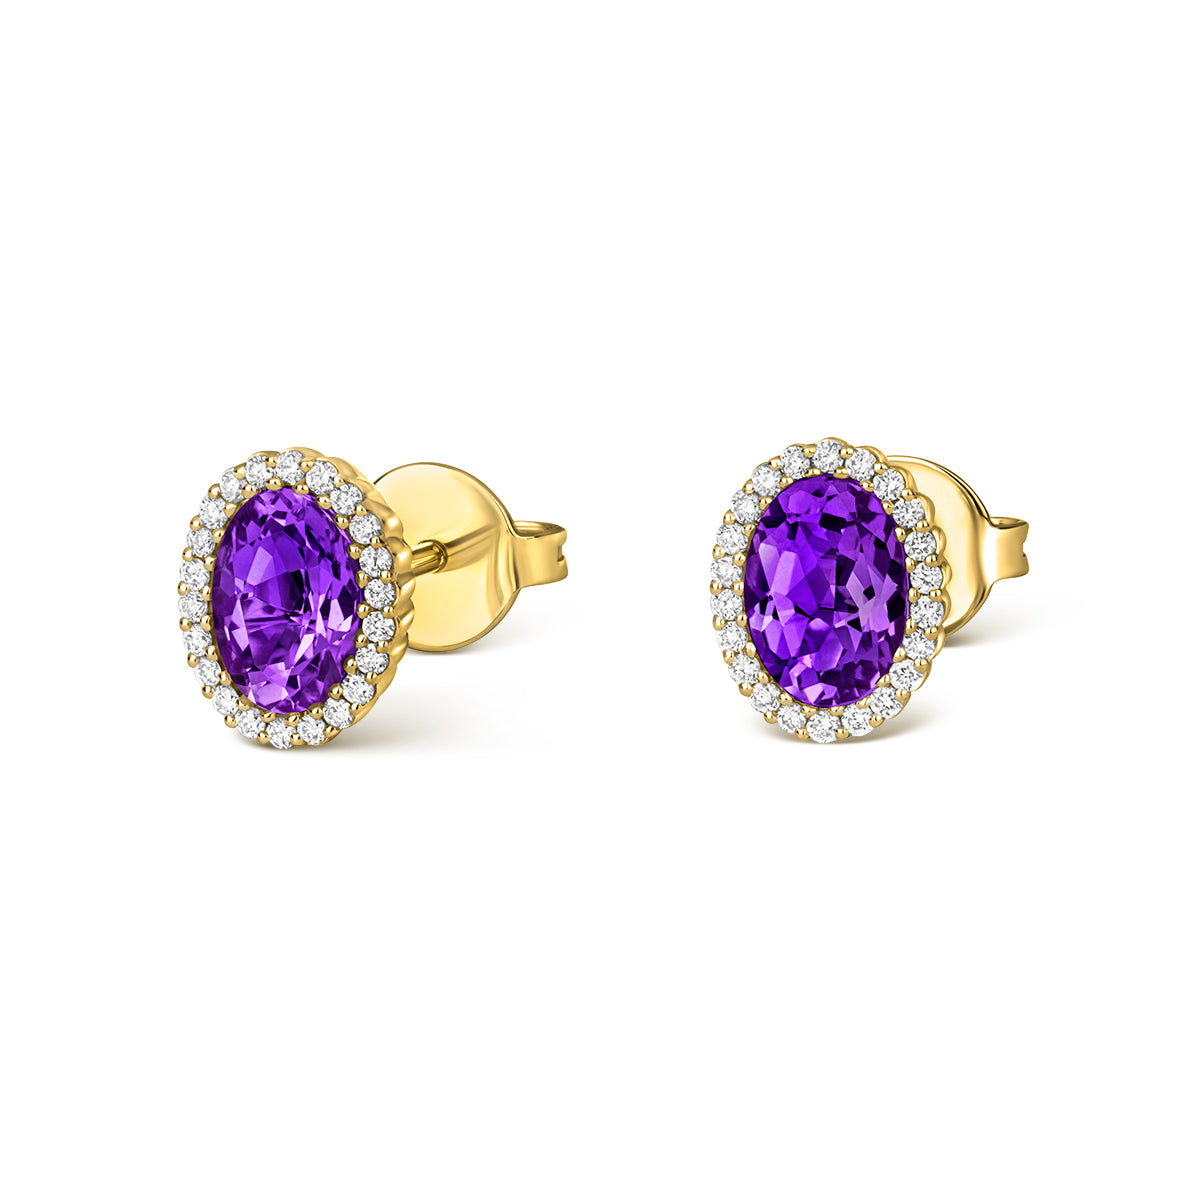 TIVON 18ct Yellow Gold Oval Cut Amethyst and Diamond Earrings